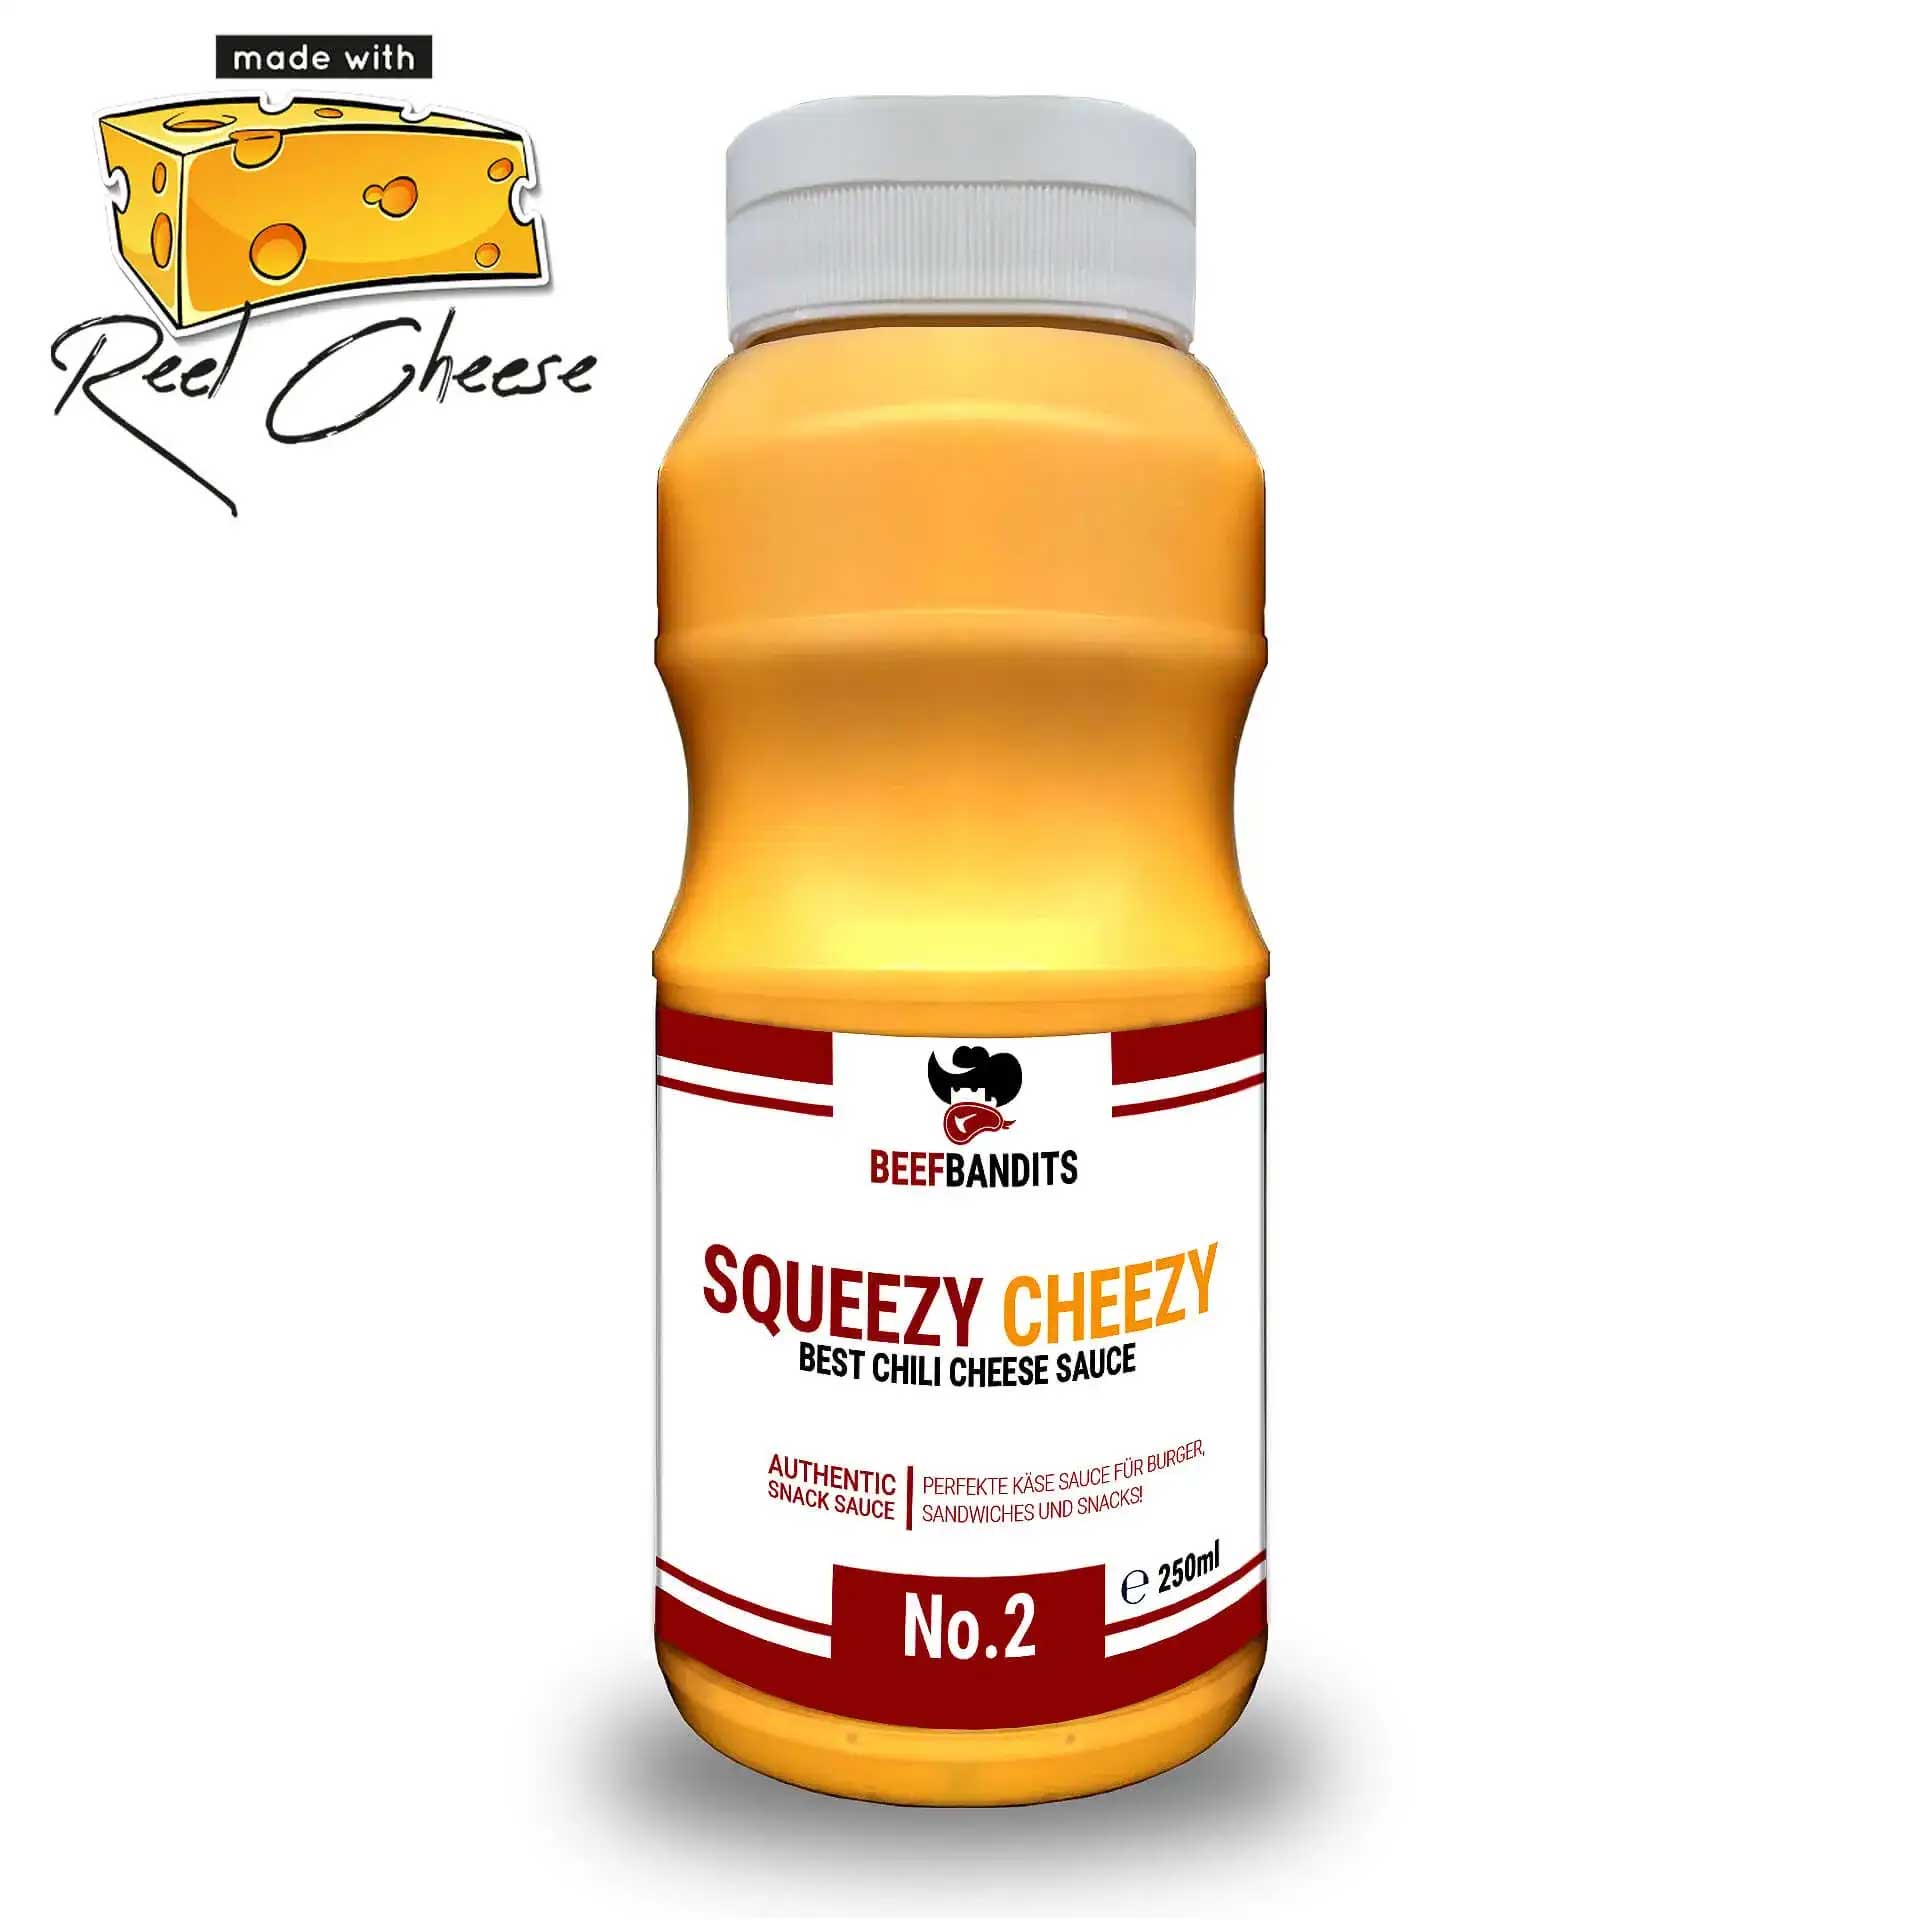 Beefbandits SQUEEZY CHEEZY - BEST CHILI CHEESE SAUCE